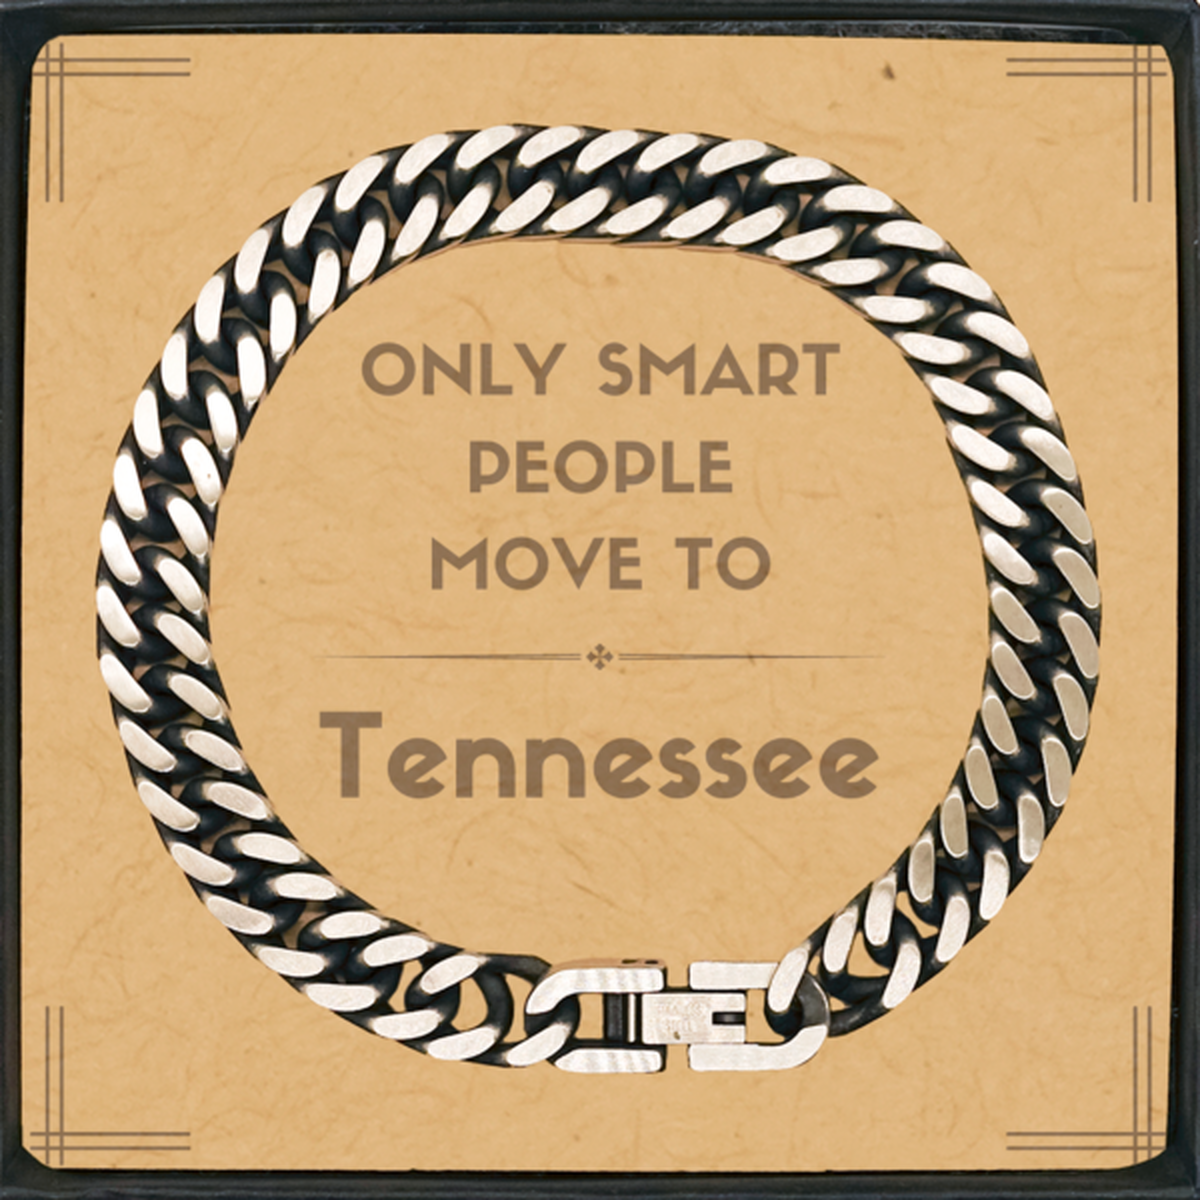 Only smart people move to Tennessee Cuban Link Chain Bracelet, Message Card Gifts For Tennessee, Move to Tennessee Gifts for Friends Coworker Funny Saying Quote